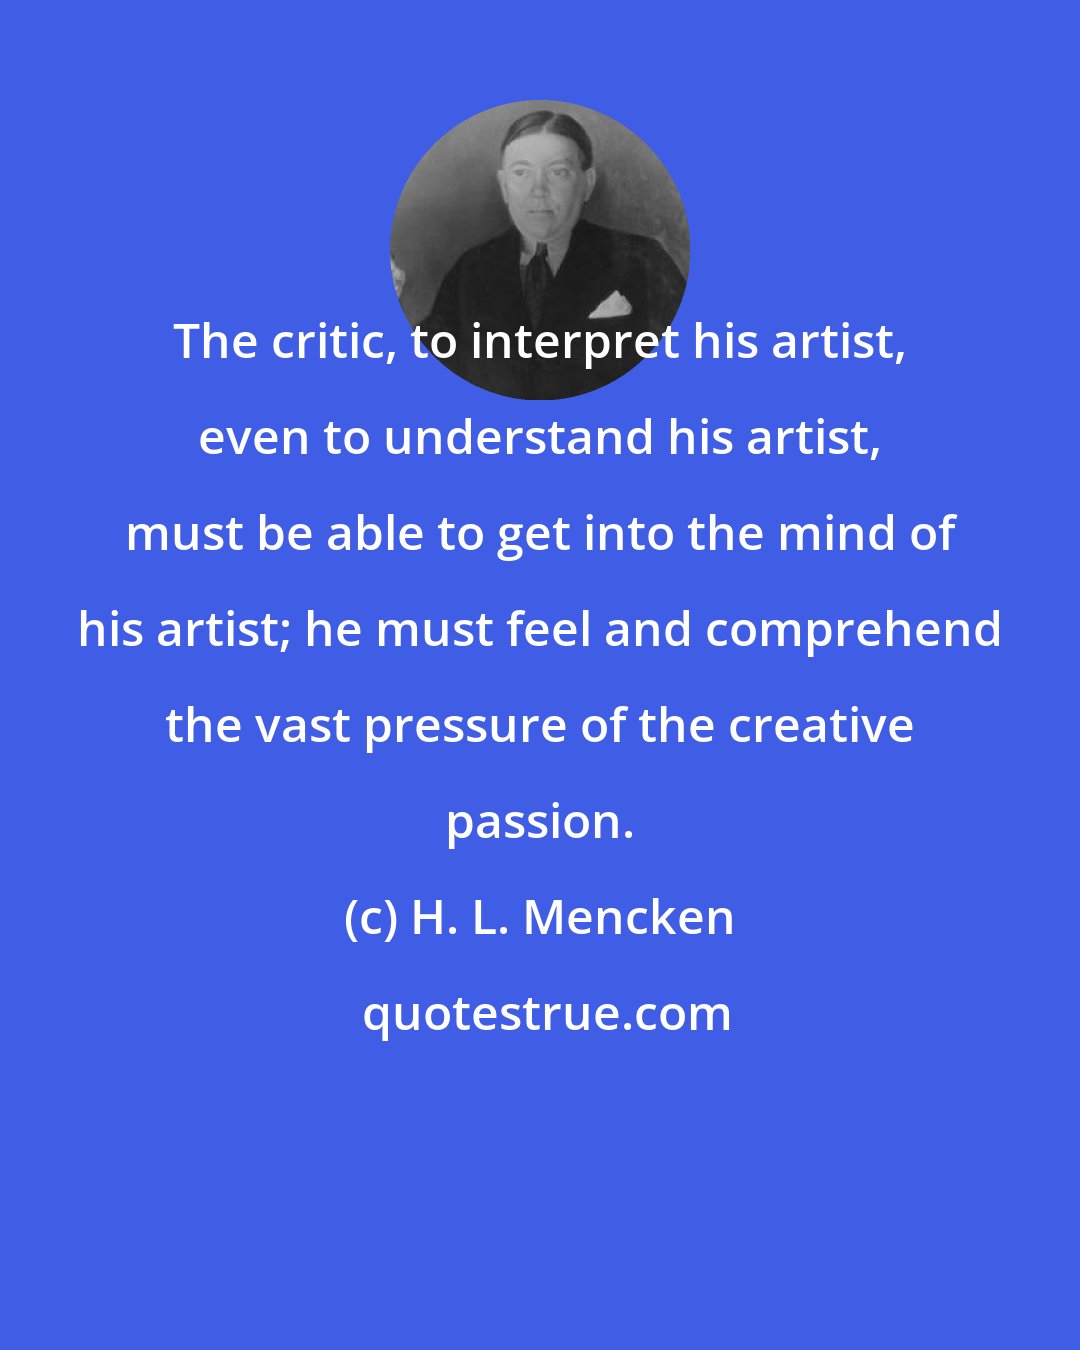 H. L. Mencken: The critic, to interpret his artist, even to understand his artist, must be able to get into the mind of his artist; he must feel and comprehend the vast pressure of the creative passion.